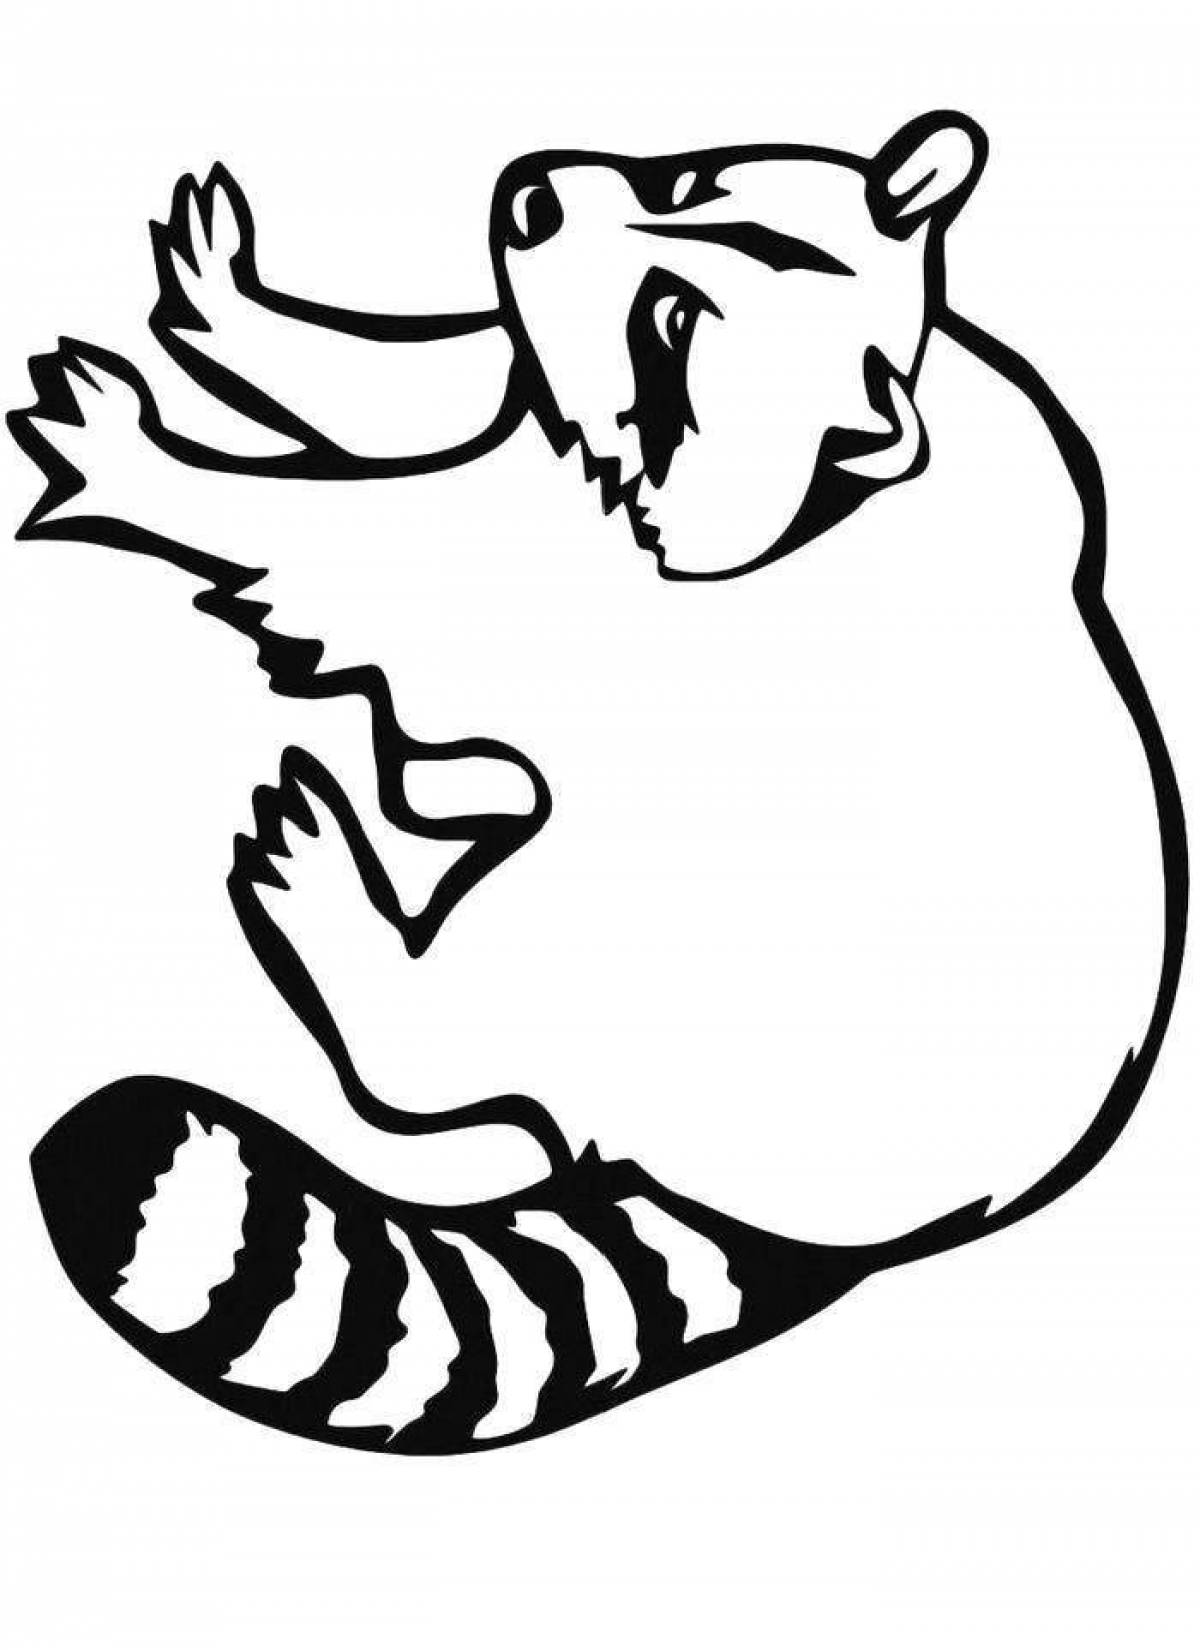 Colouring funny raccoon for kids